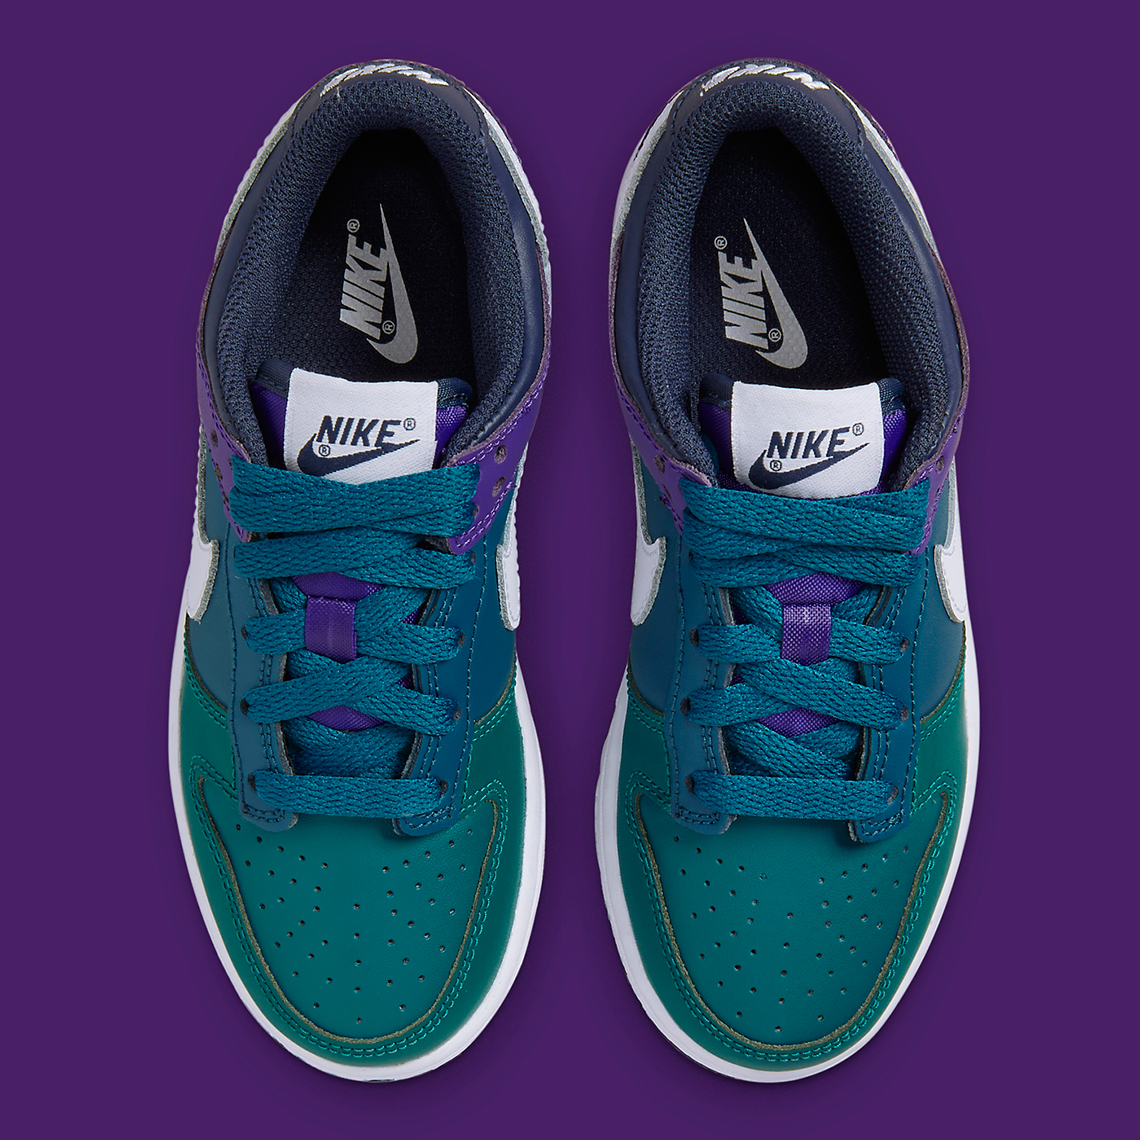 nike dunk low ps teal purple DH9756 300 7